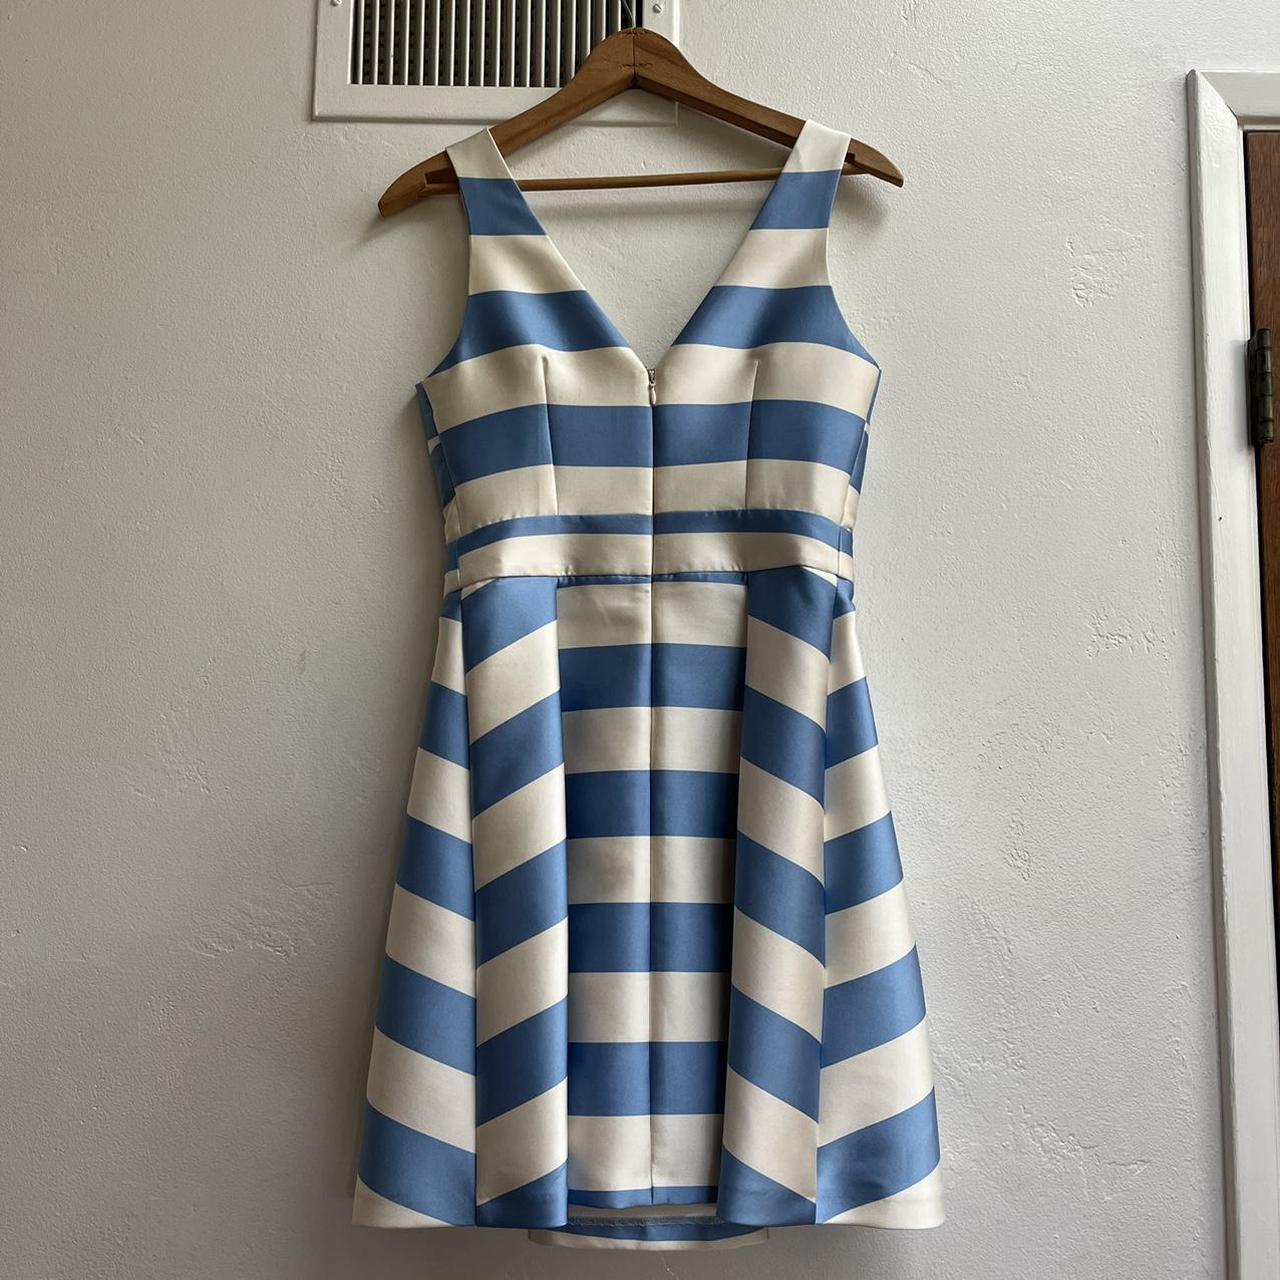 Topshop Women's Blue and White Dress (2)